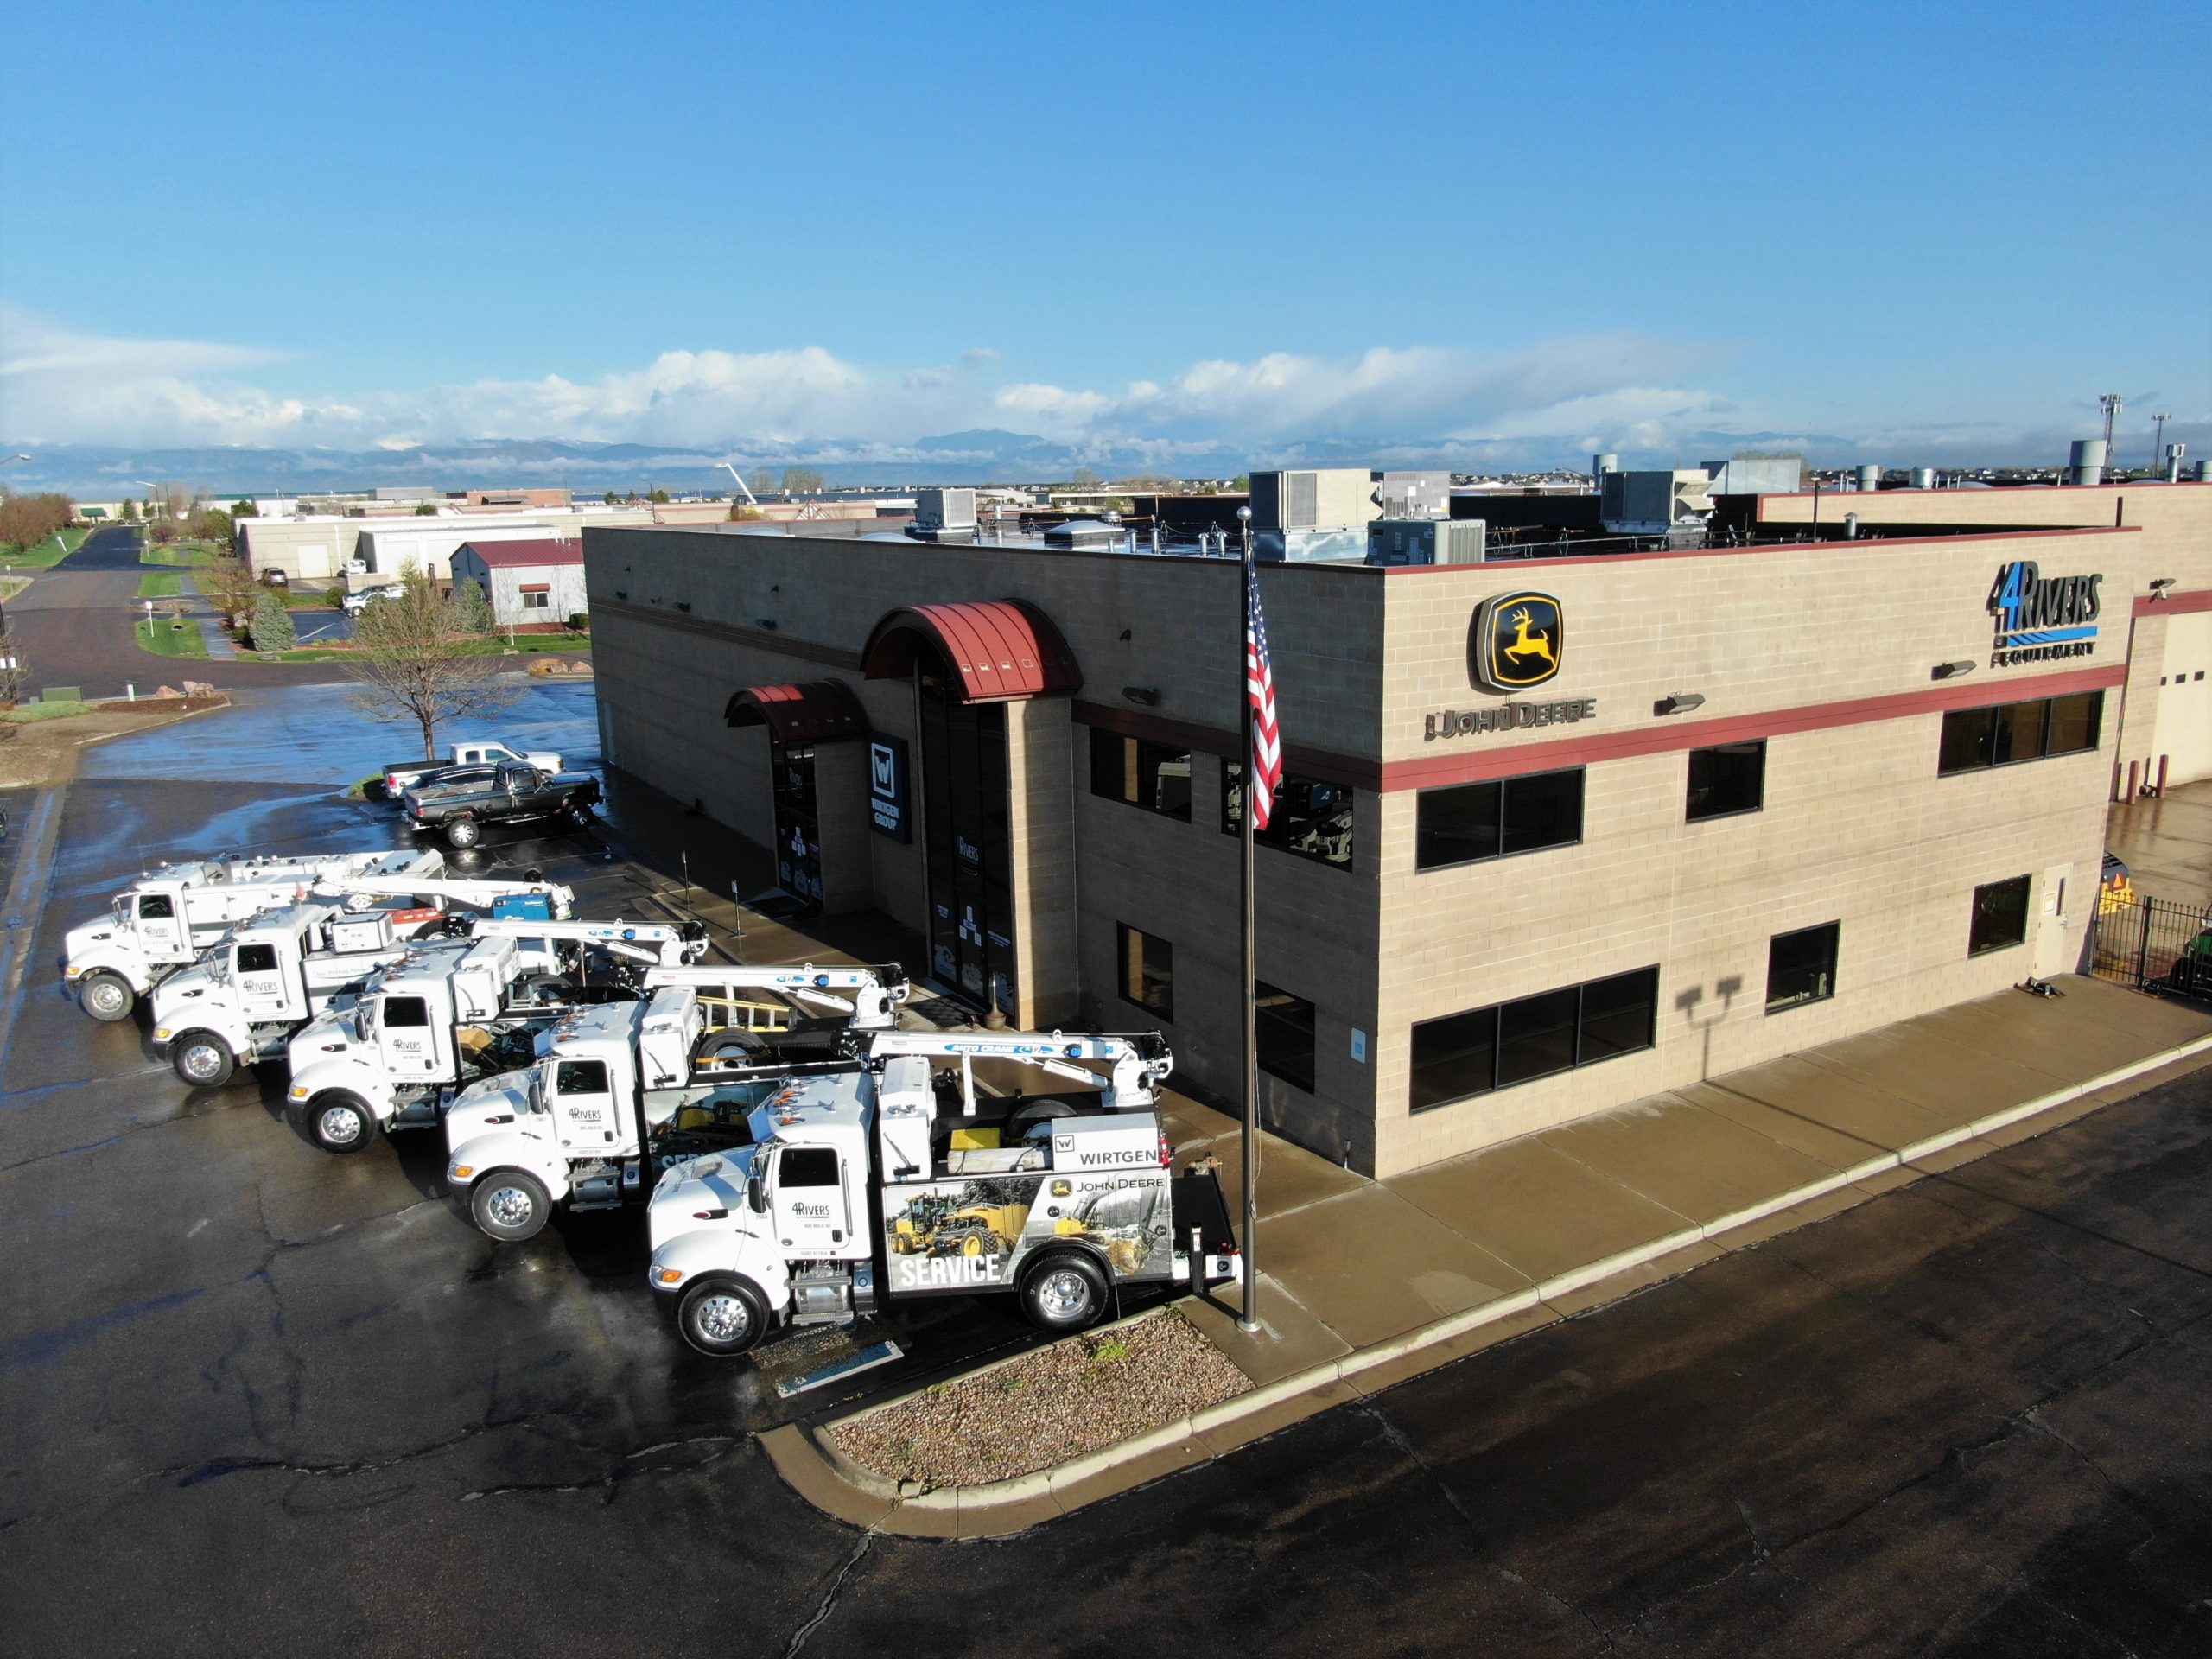 Our 4Rivers Equipment Frederick location provides industry-leading John Deere construction equipment and service.